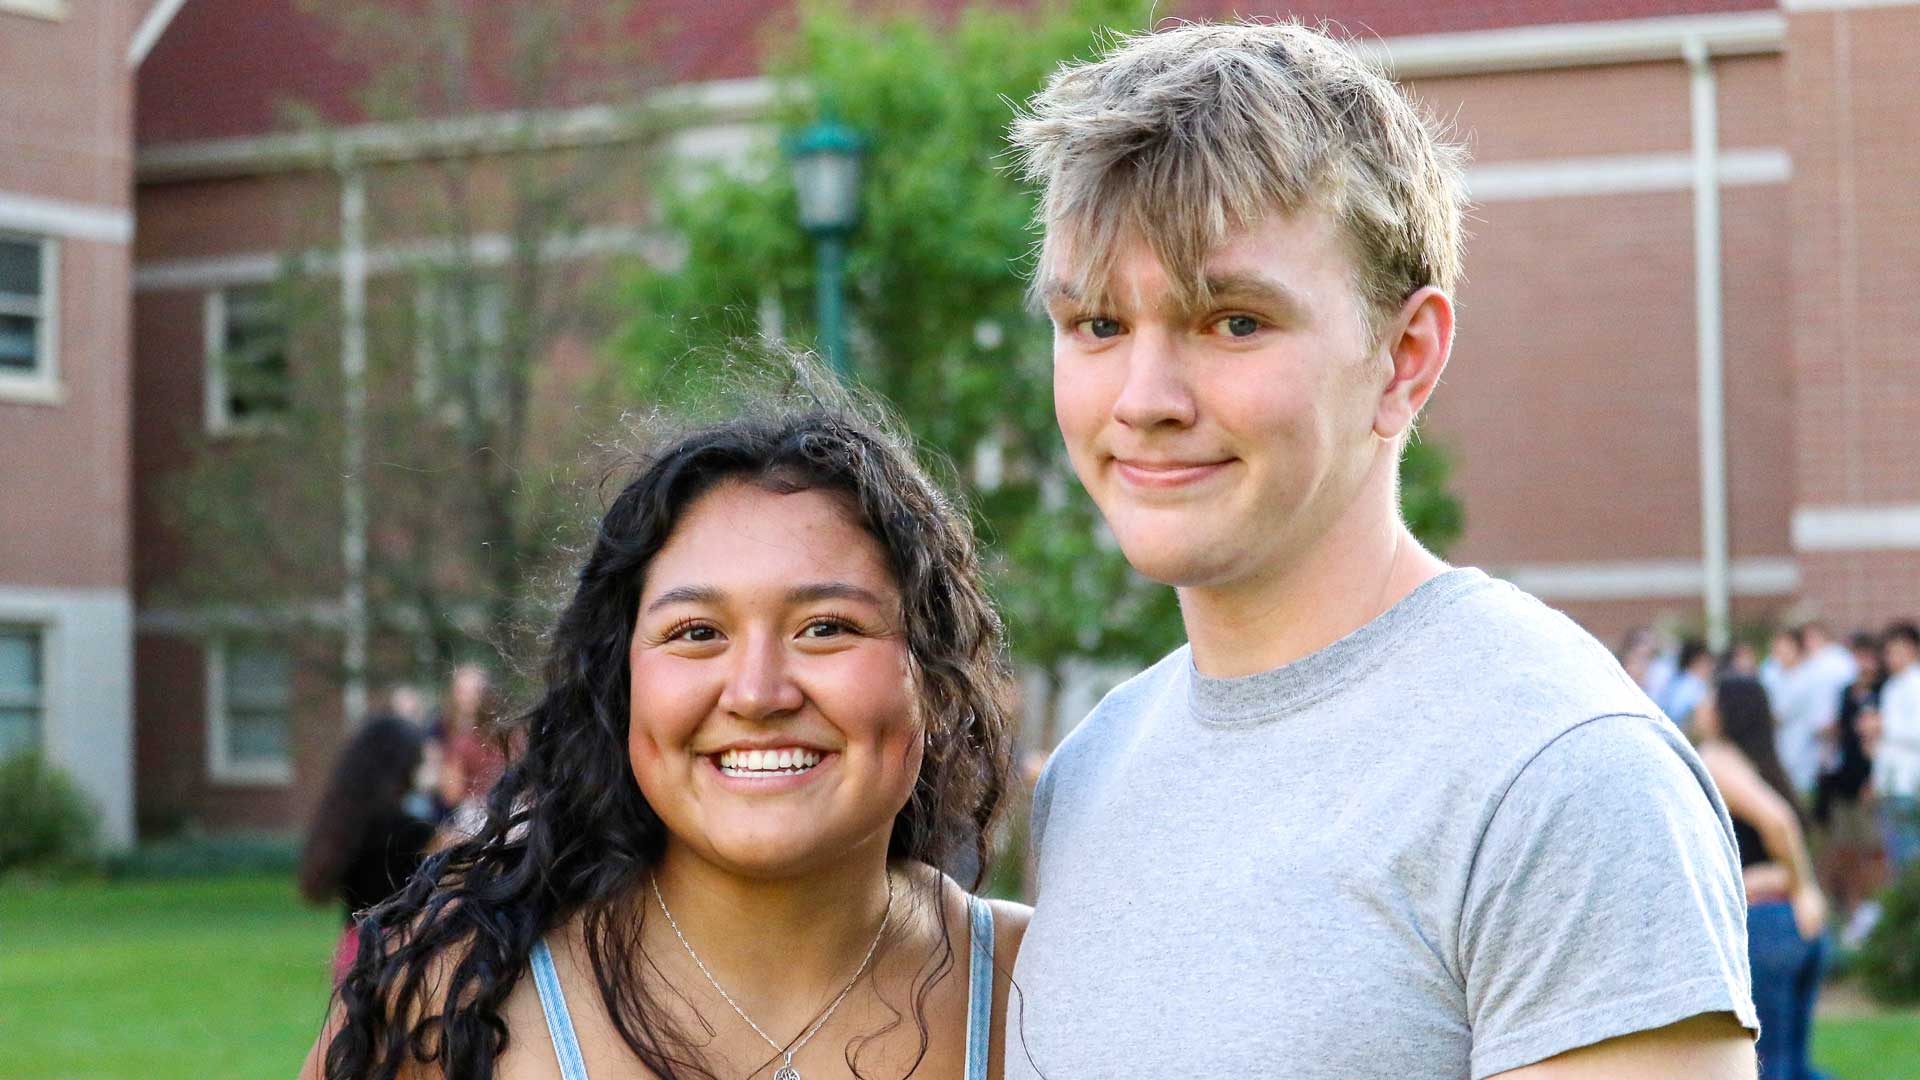 Two students outside smiling